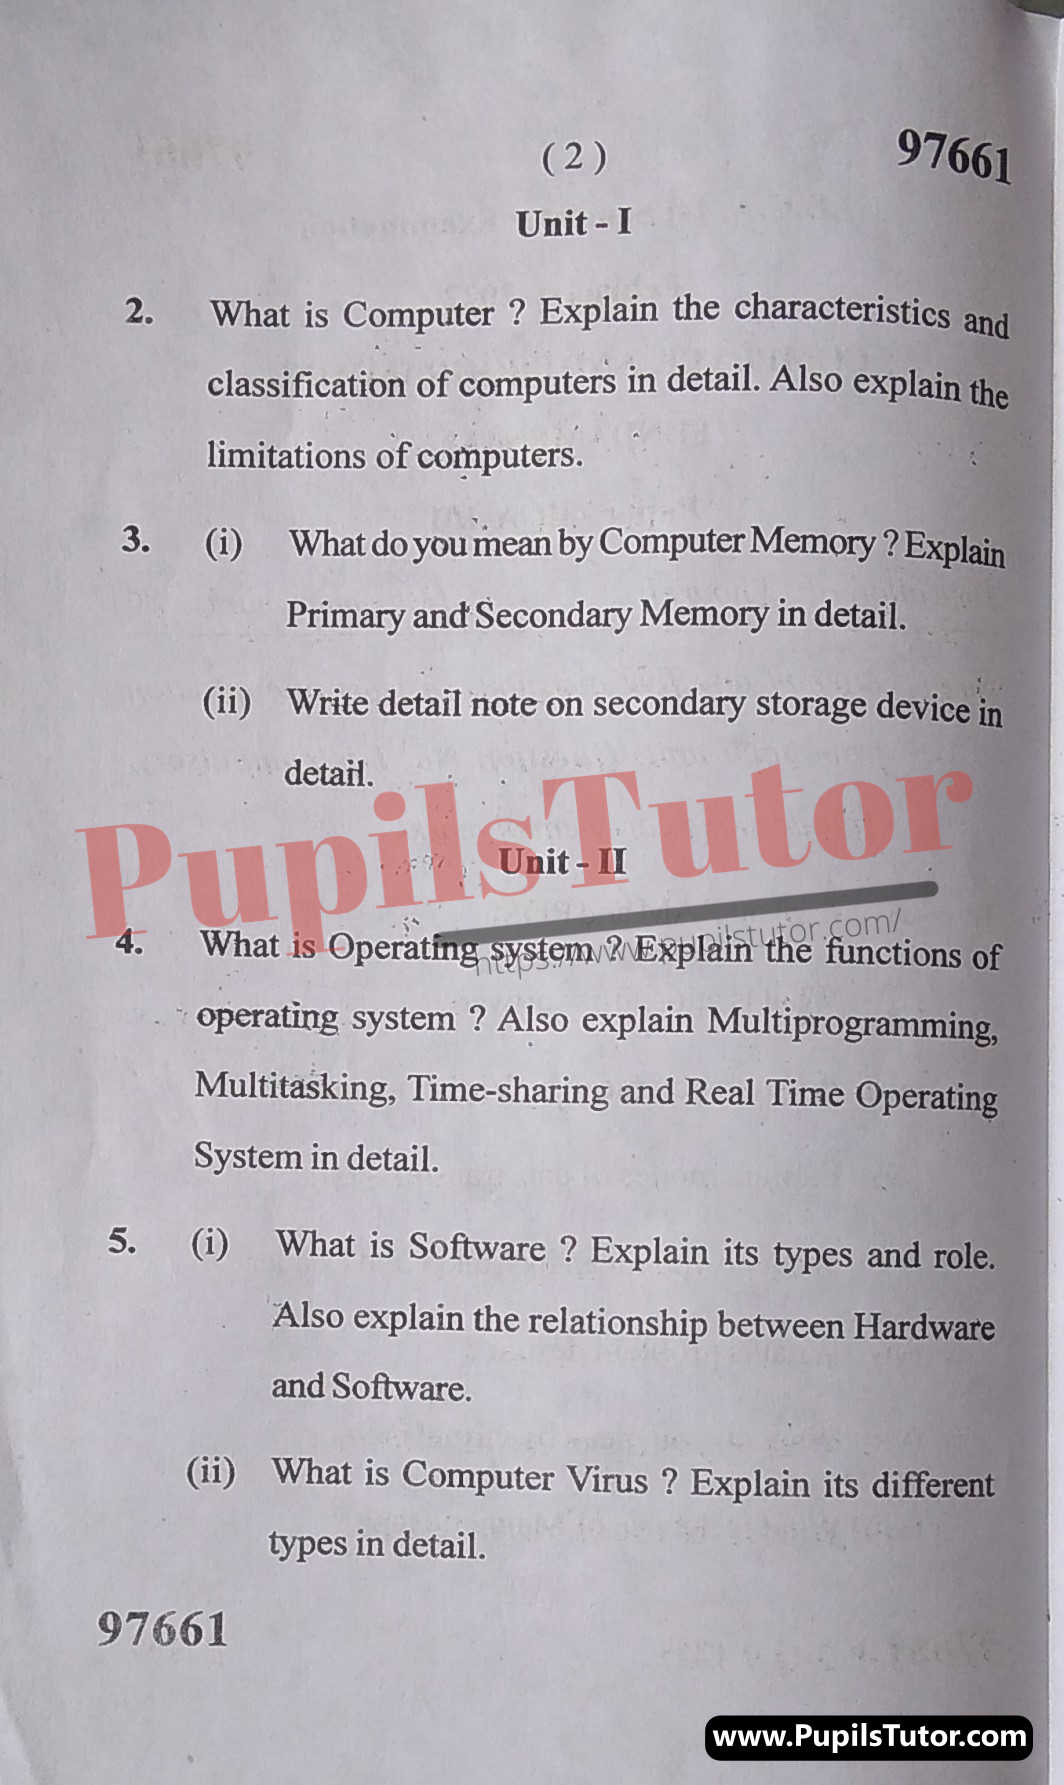 M.D. University B.C.A Computer And Programming Fundamentals (BCA-101) First Semester Important Question Answer And Solution - www.pupilstutor.com (Paper Page Number 2)